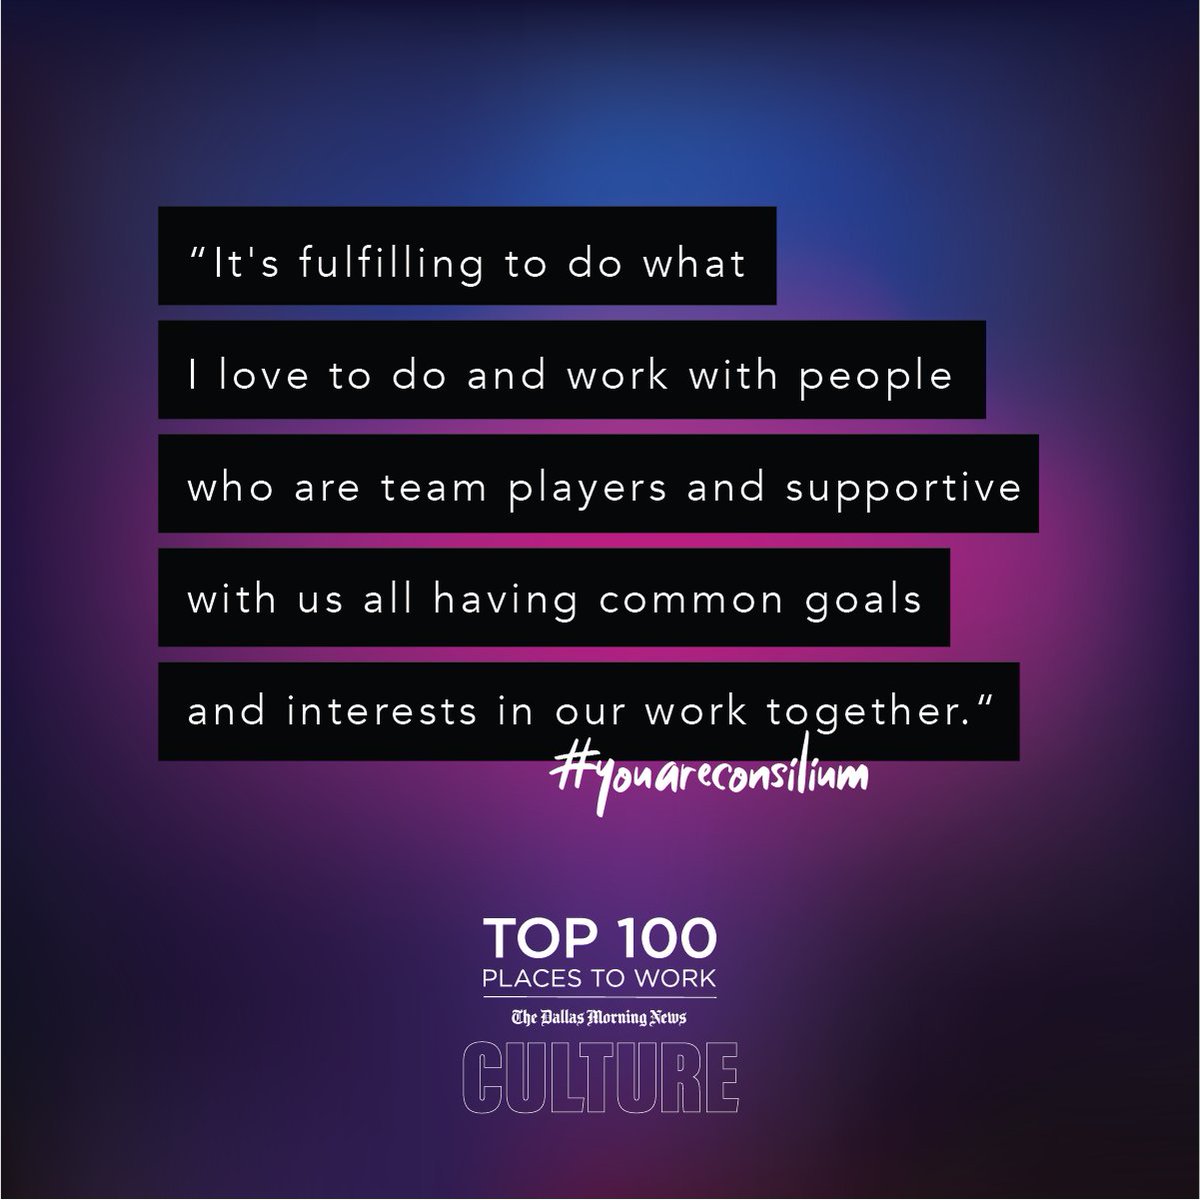 We support each other to reach a common goal!!! #DMNTop100

A new career awaits you in 2023!  Join our Team!
Visit: bit.ly/3GAN6EO

#top100placestowork #jobinterview #careerdevelopment #employeeappreciation #staffingagency #careers #youareconsilium #bestinstaffing